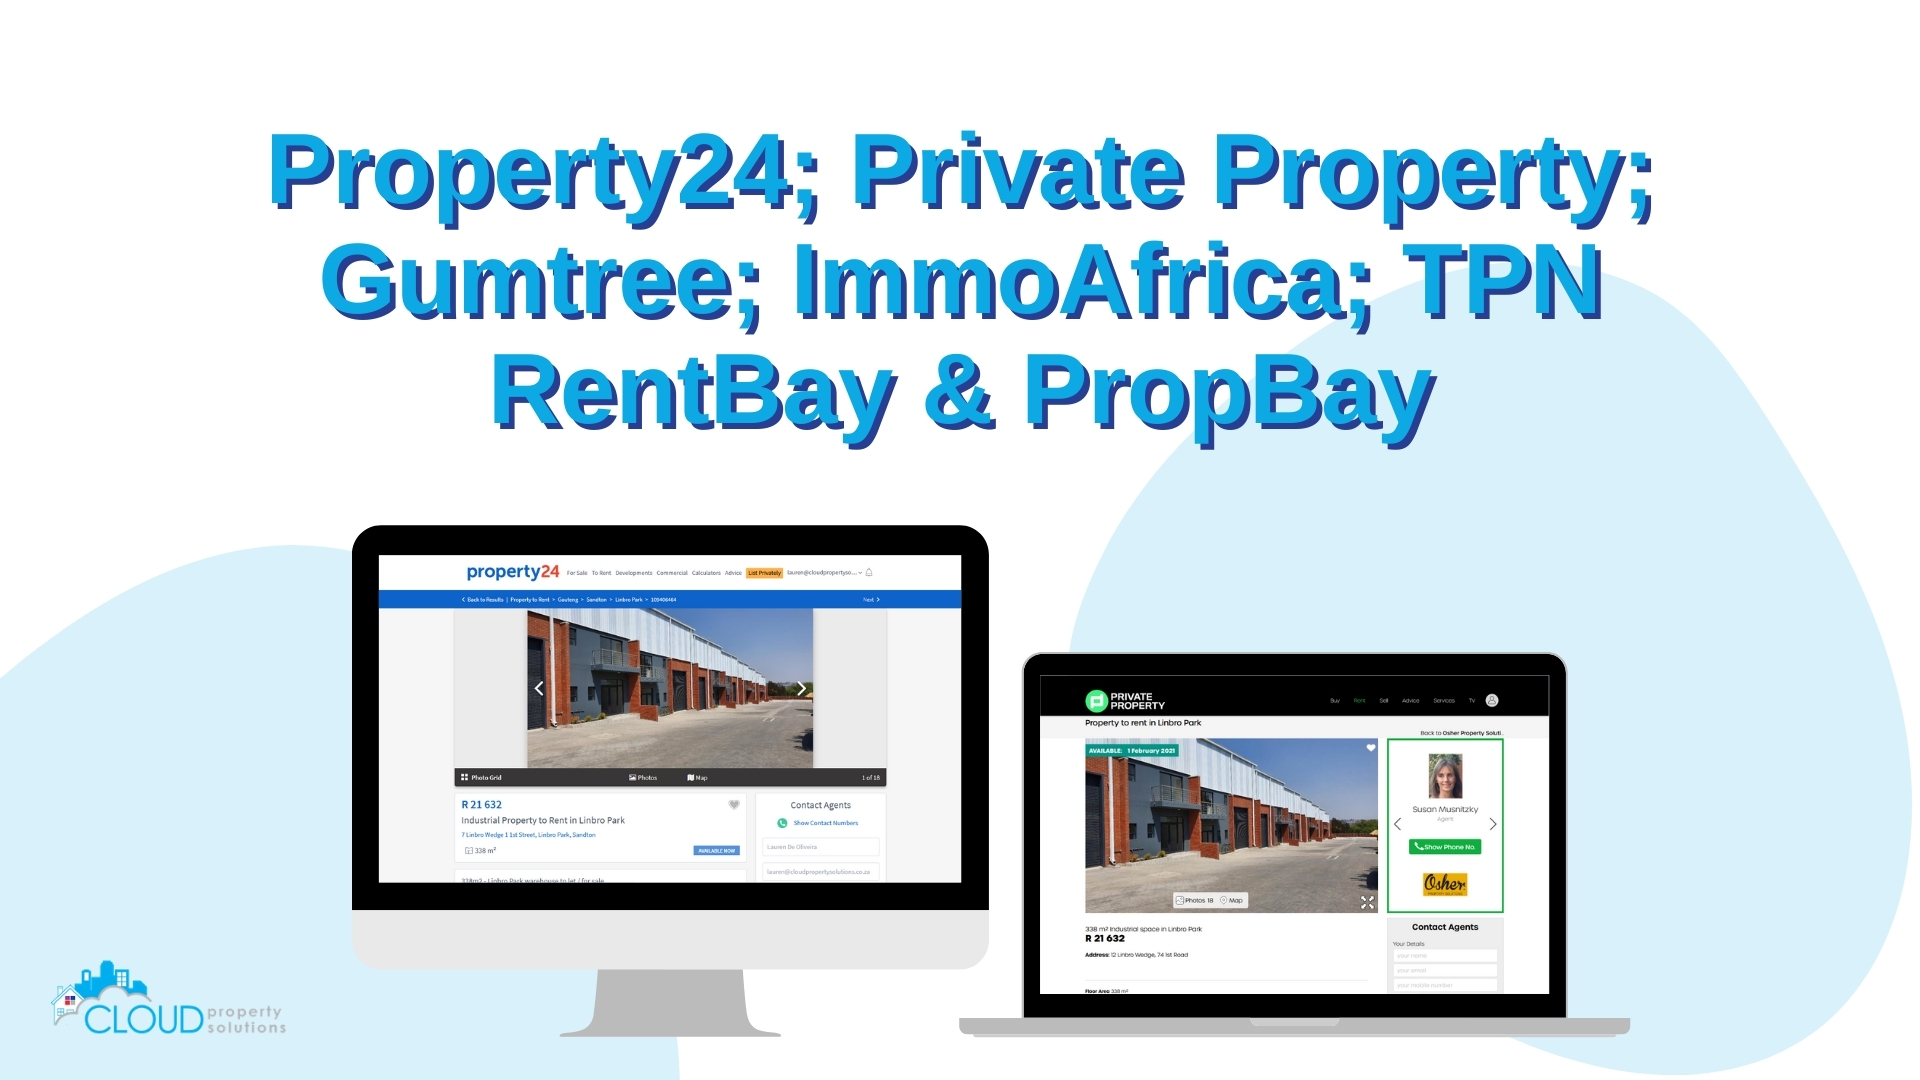 Listings can be published to Property24, Private Property, Gumtree, IOL Property, ImmoAfrica, and TPN